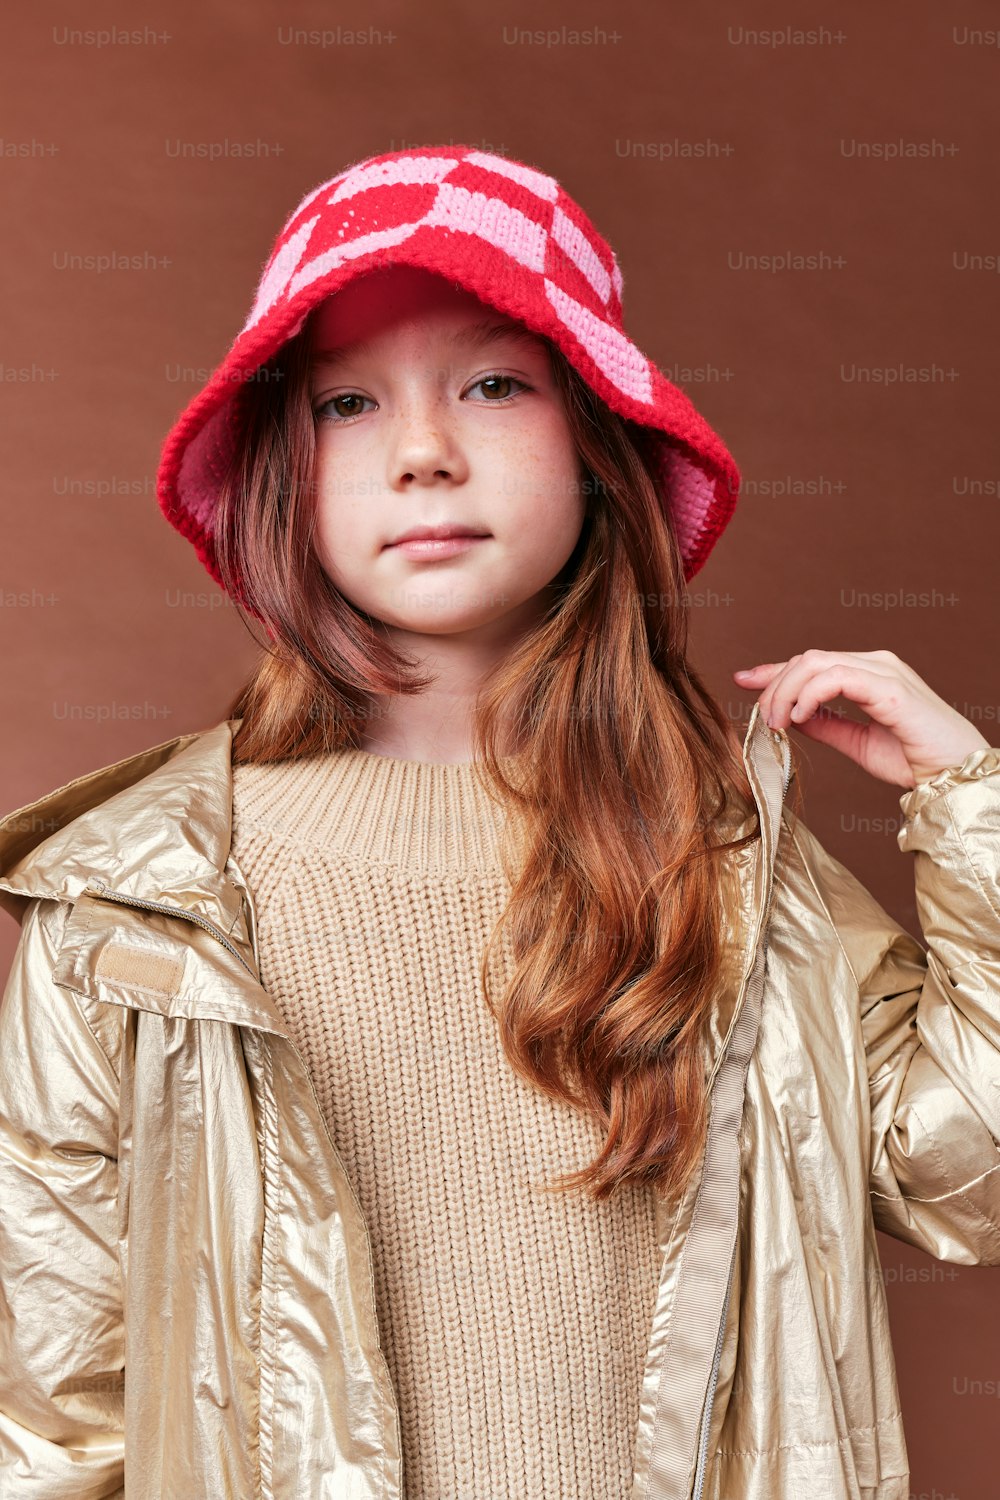 a young girl wearing a red hat and jacket